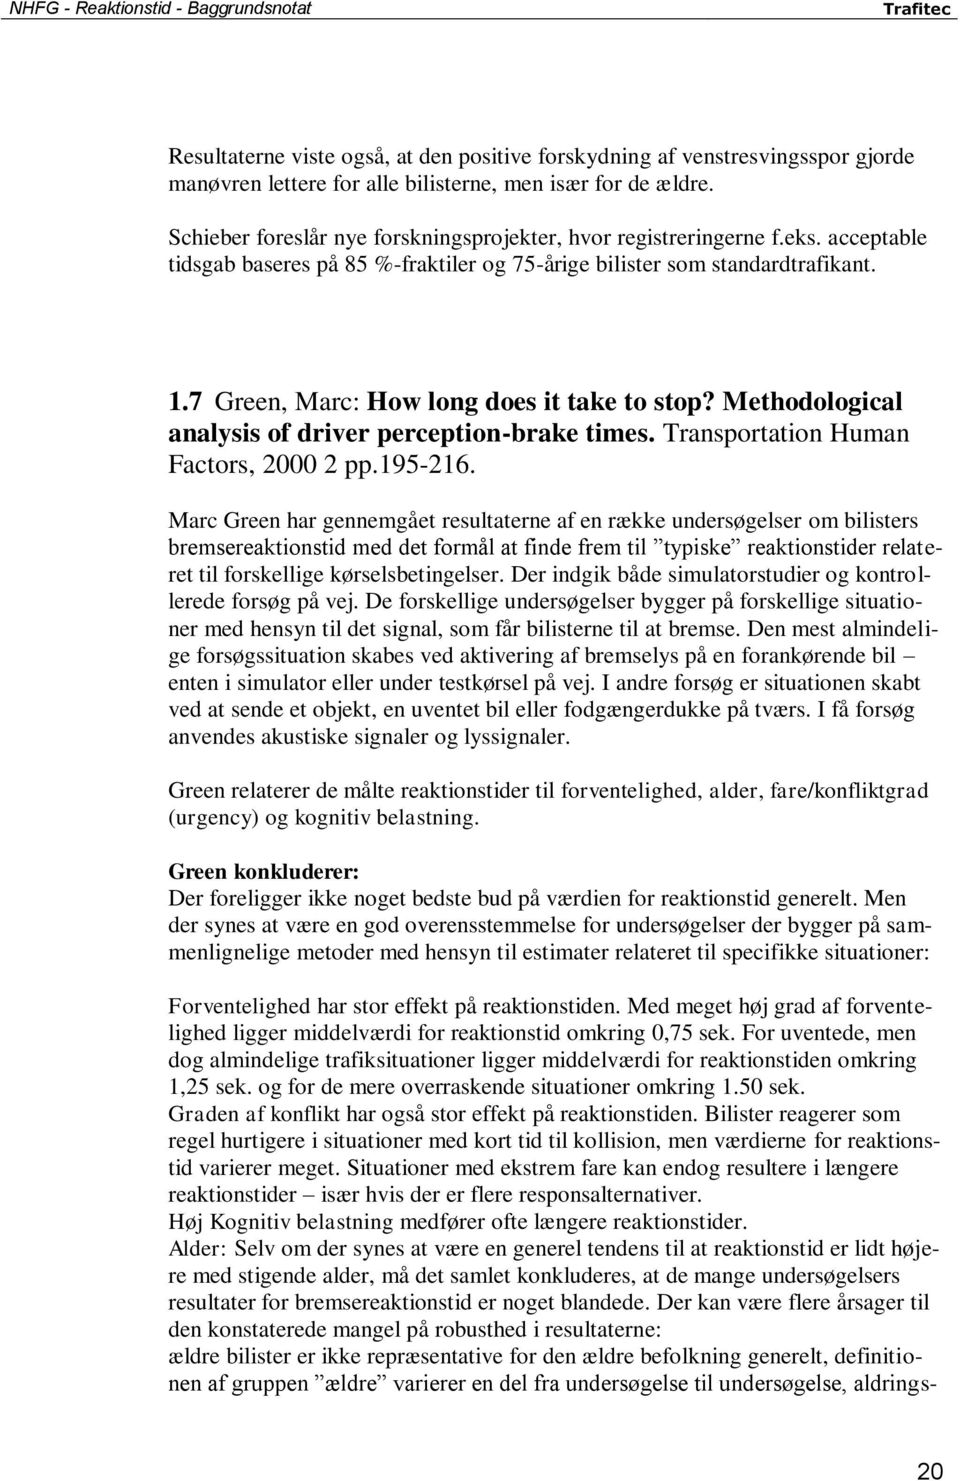 7 Green, Marc: How long does it take to stop? Methodological analysis of driver perception-brake times. Transportation Human Factors, 2000 2 pp.195-216.